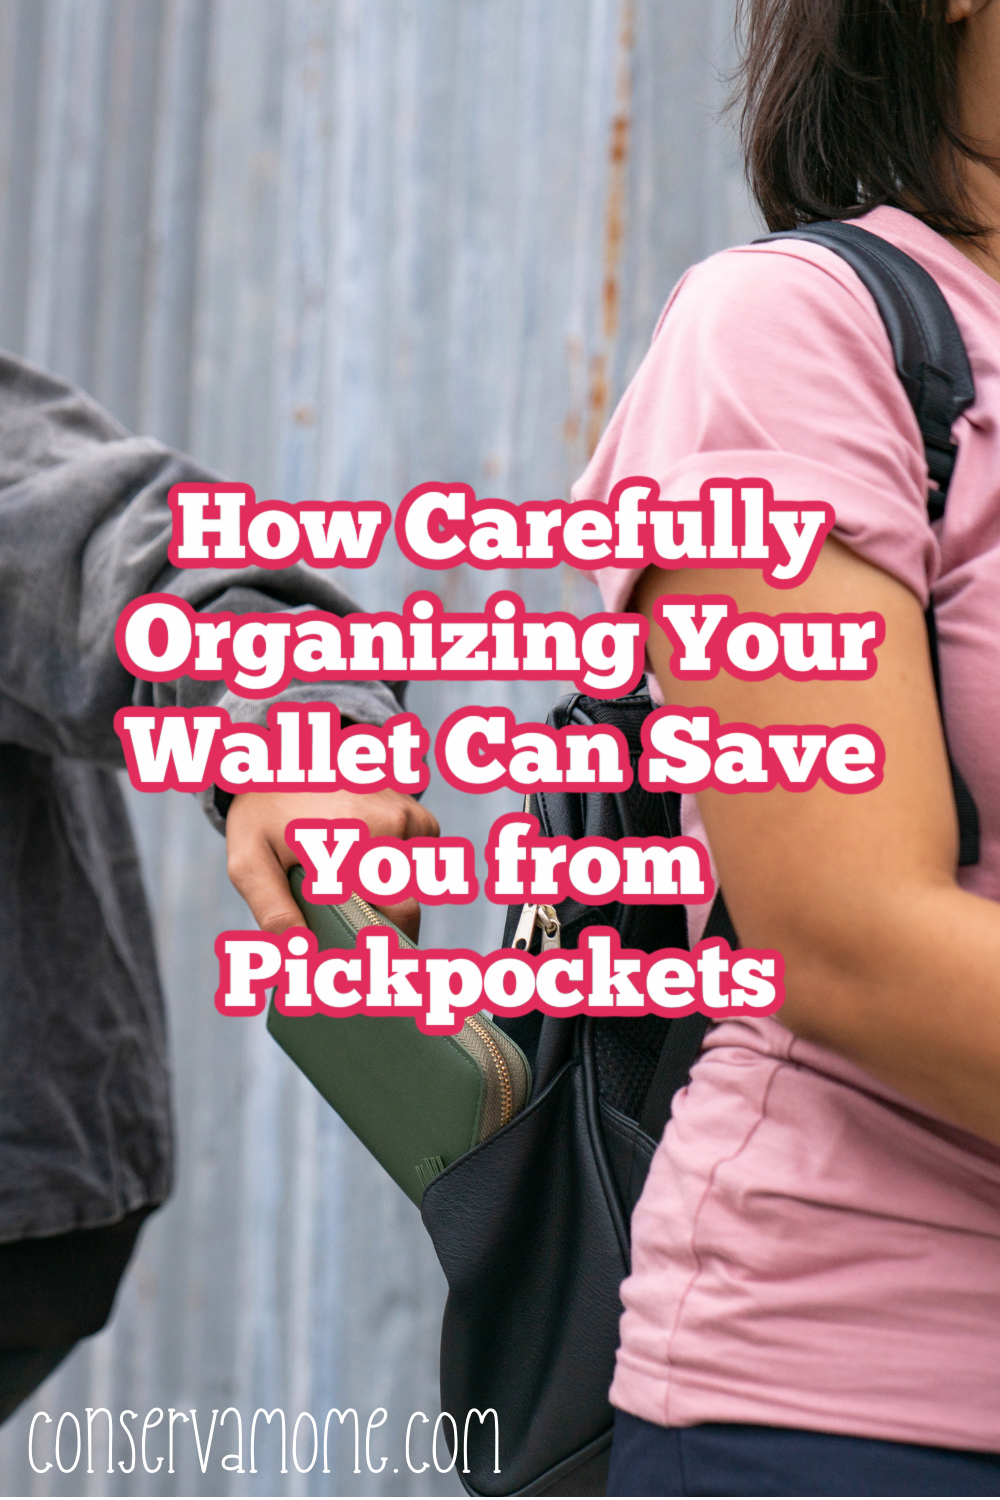 How Carefully Organizing Your Wallet Can Save You from Pickpockets